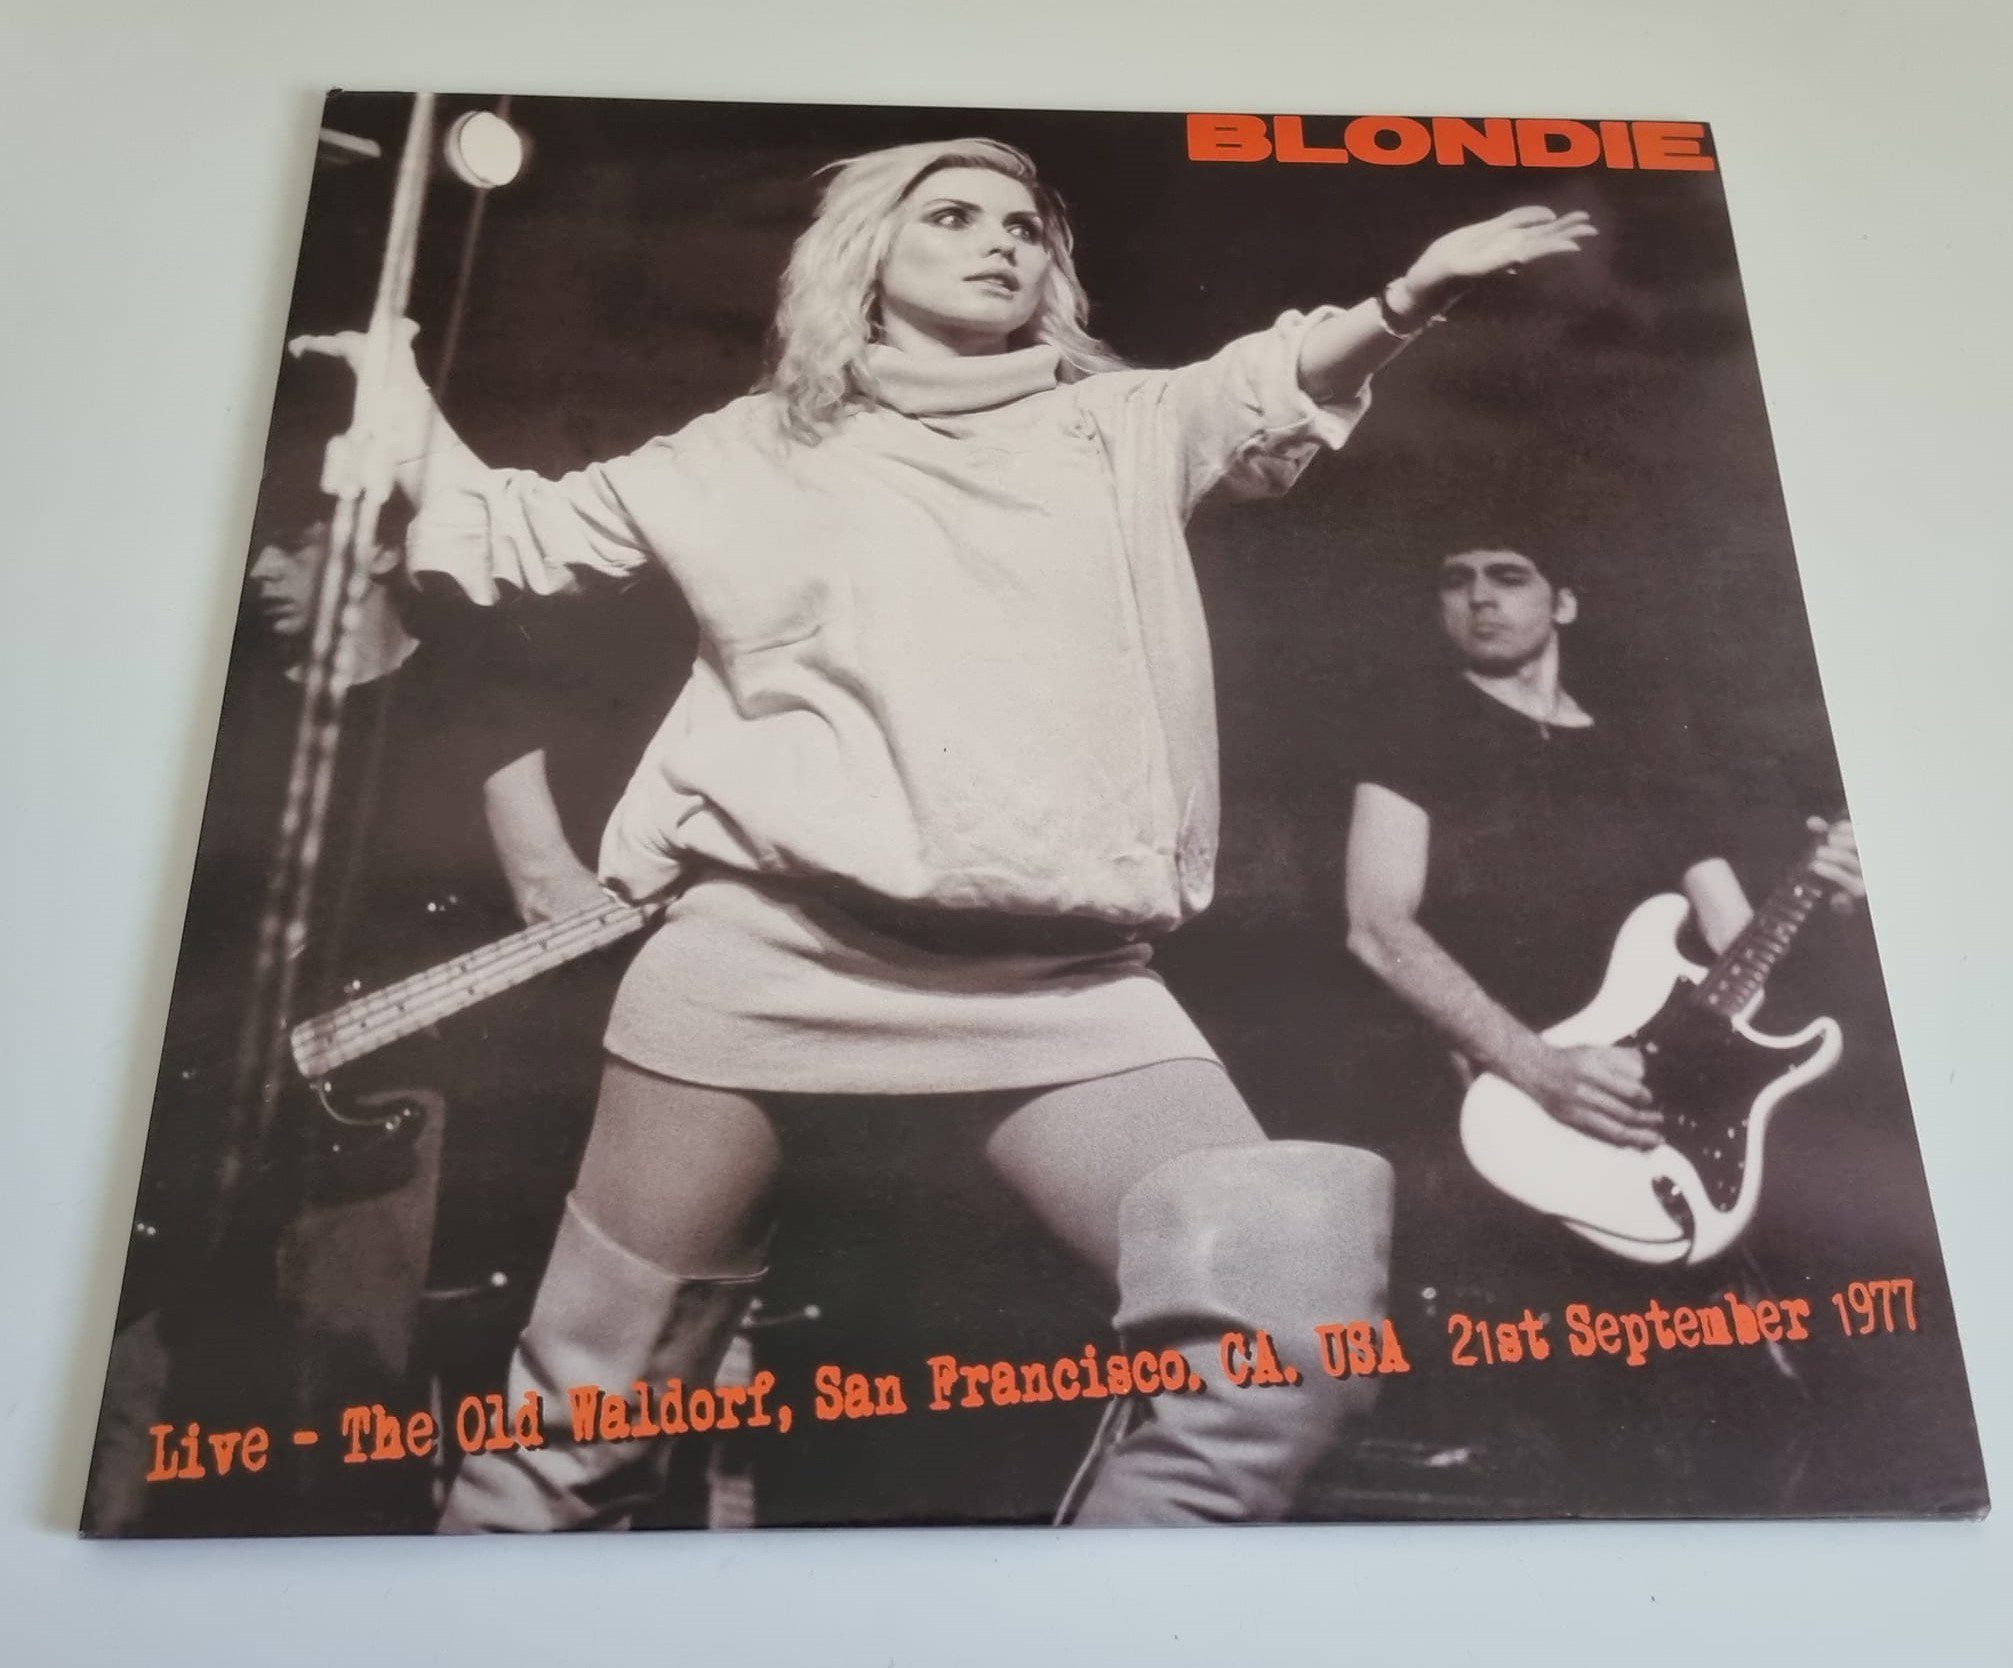 Buy this rare Blondie record by clicking here